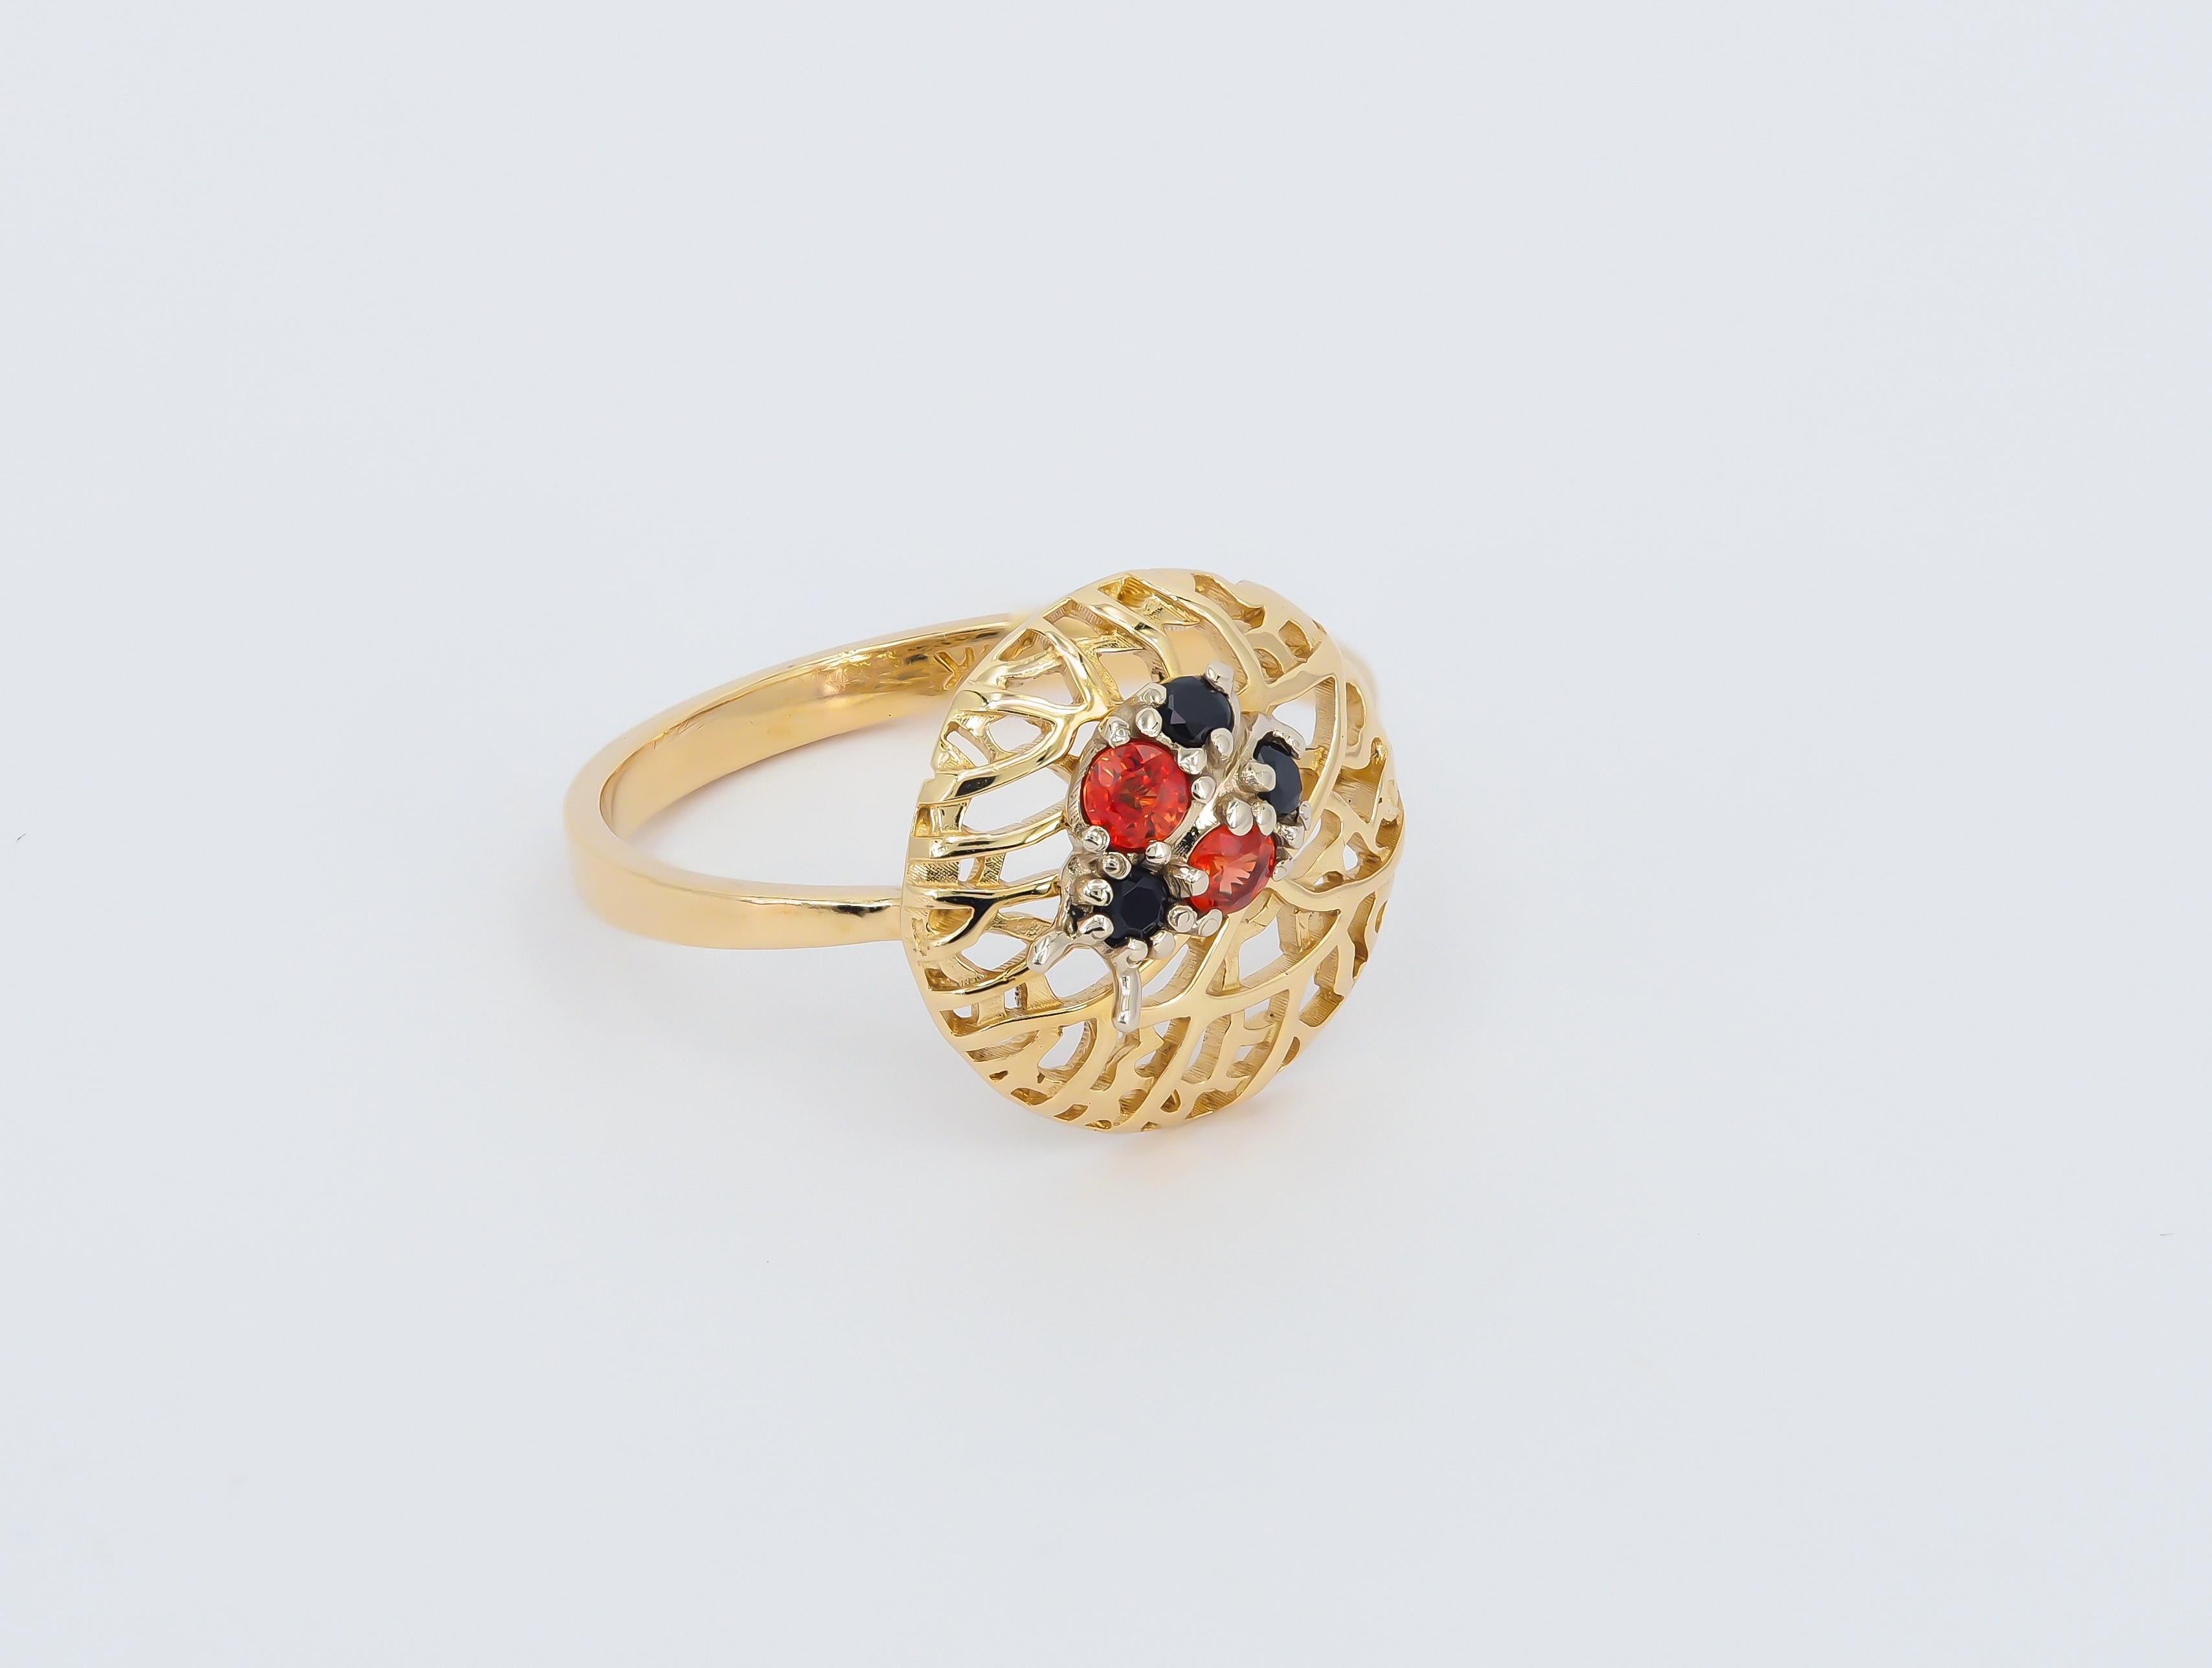 Modern Ladybug ring with colored gemstones.  For Sale